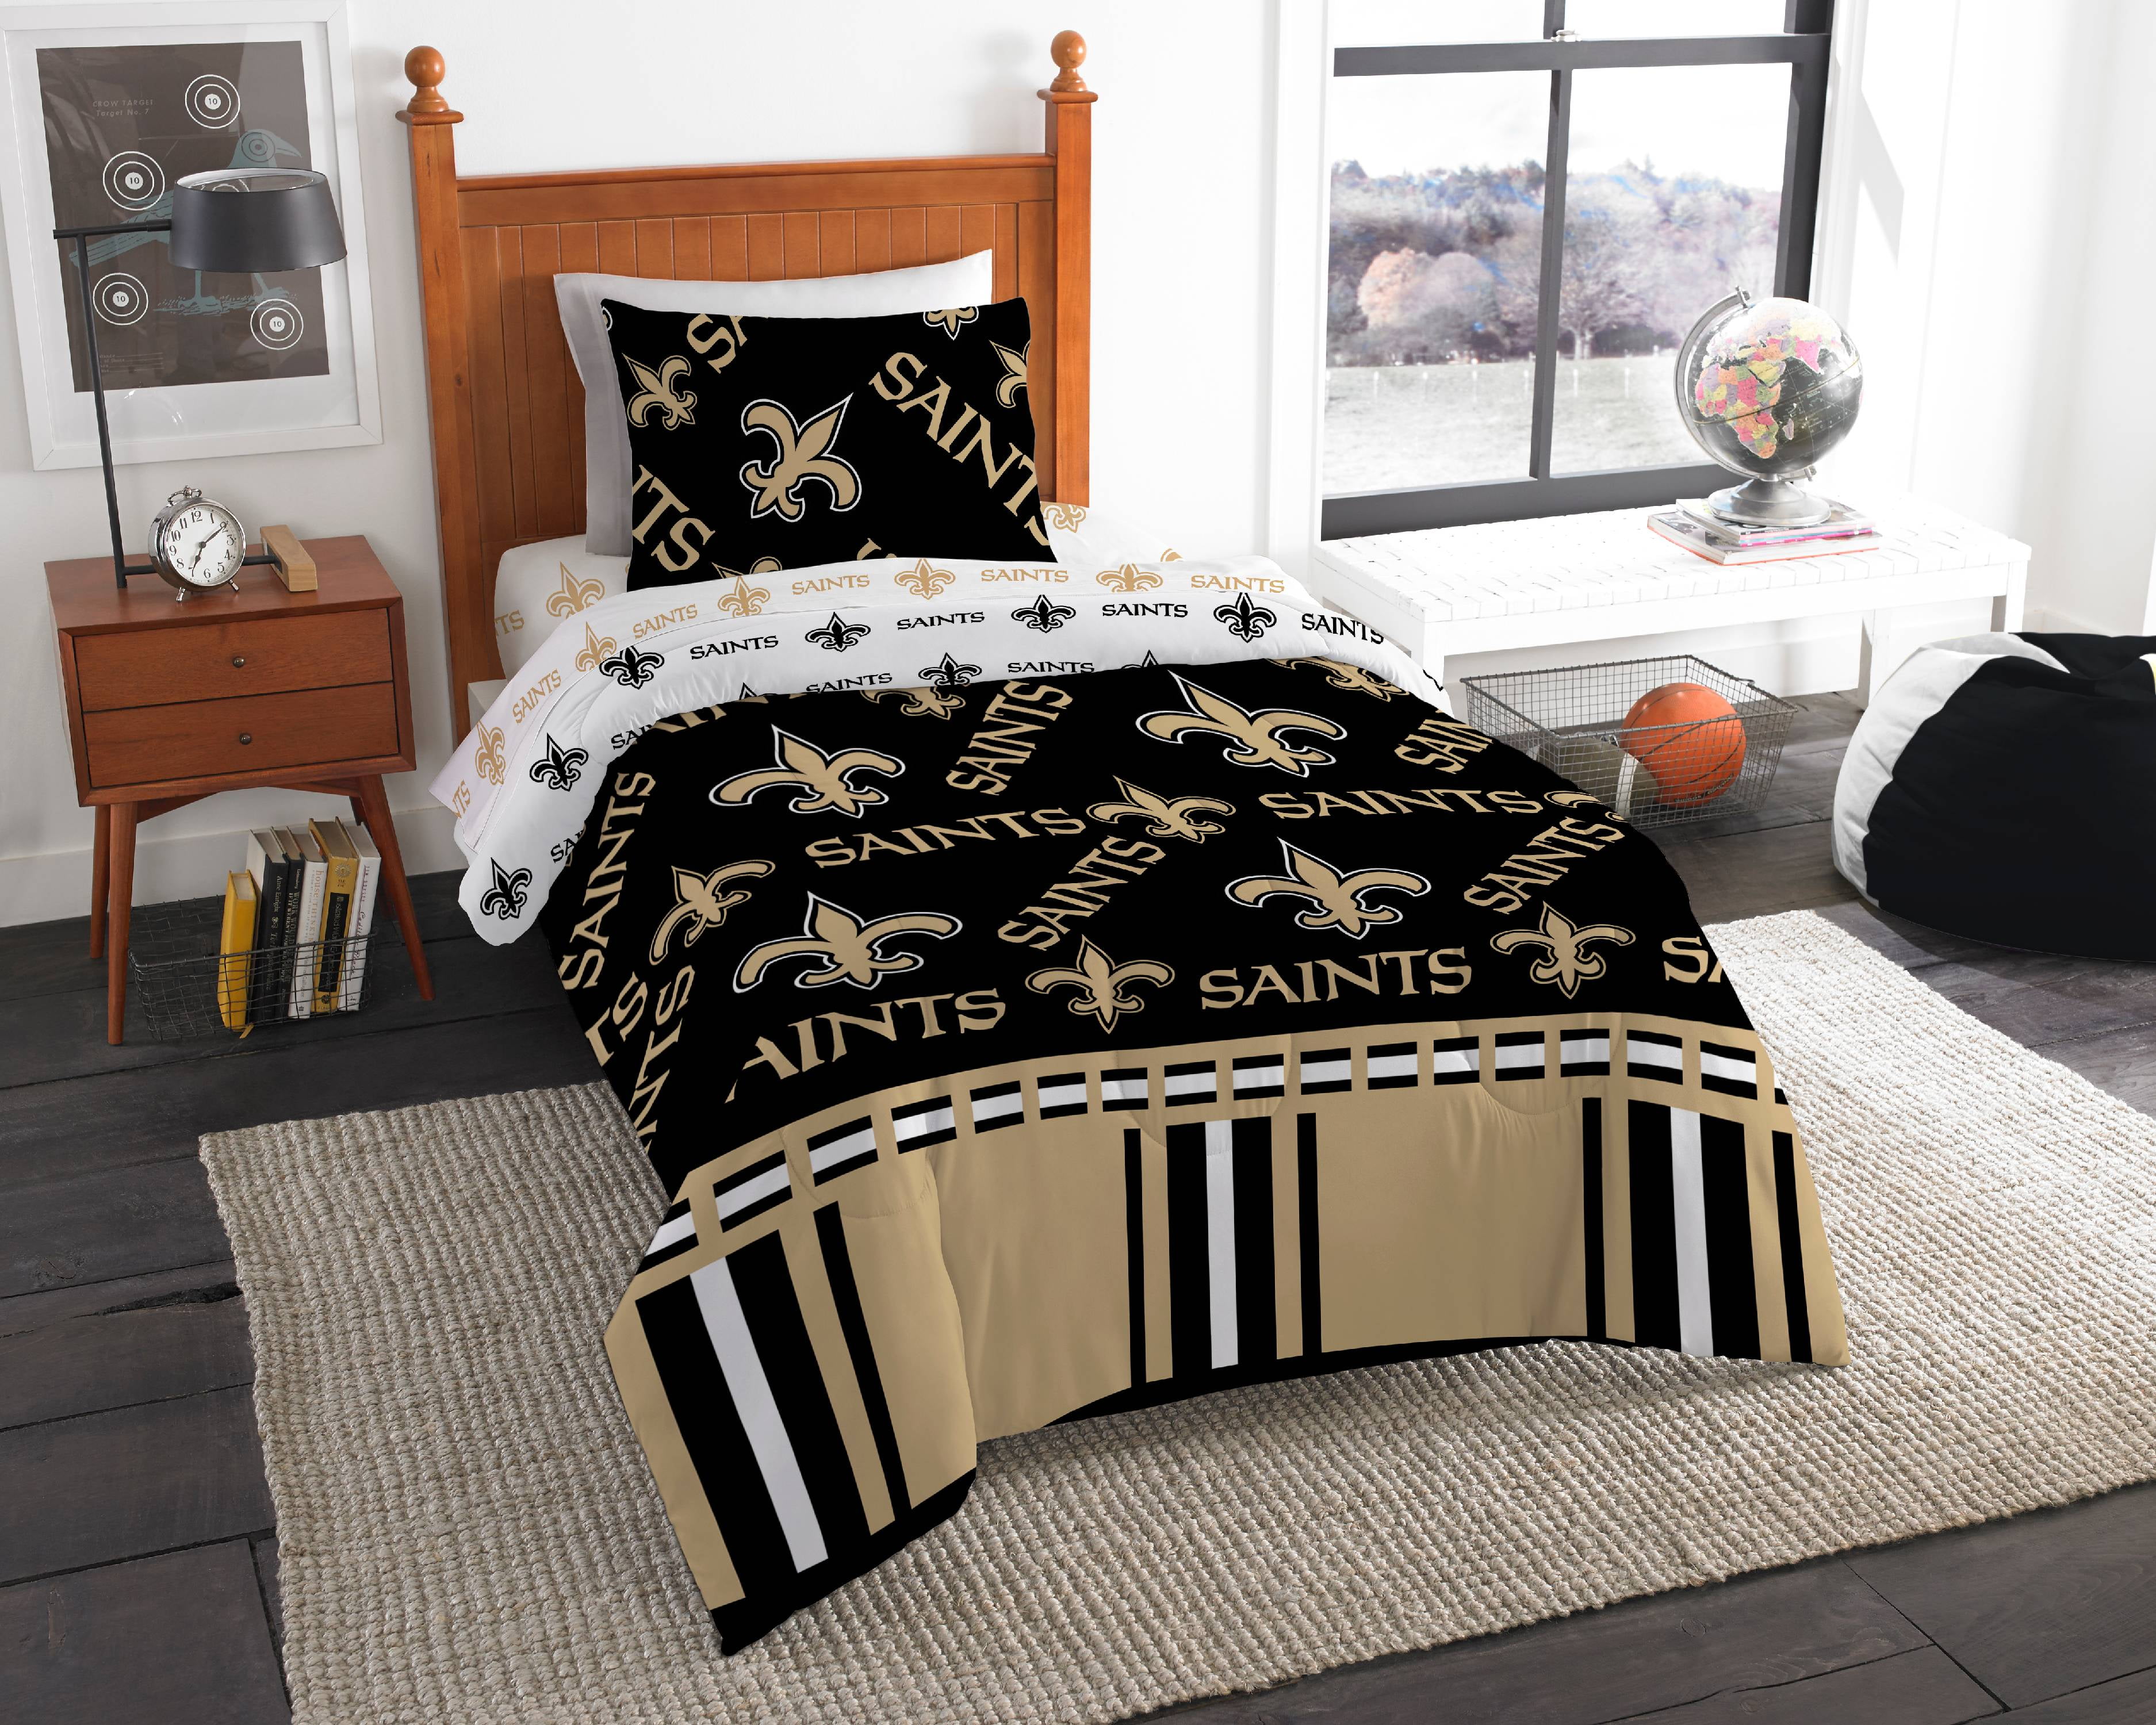 Gold Be-You-tiful Home Orlena Super King Duvet Cover